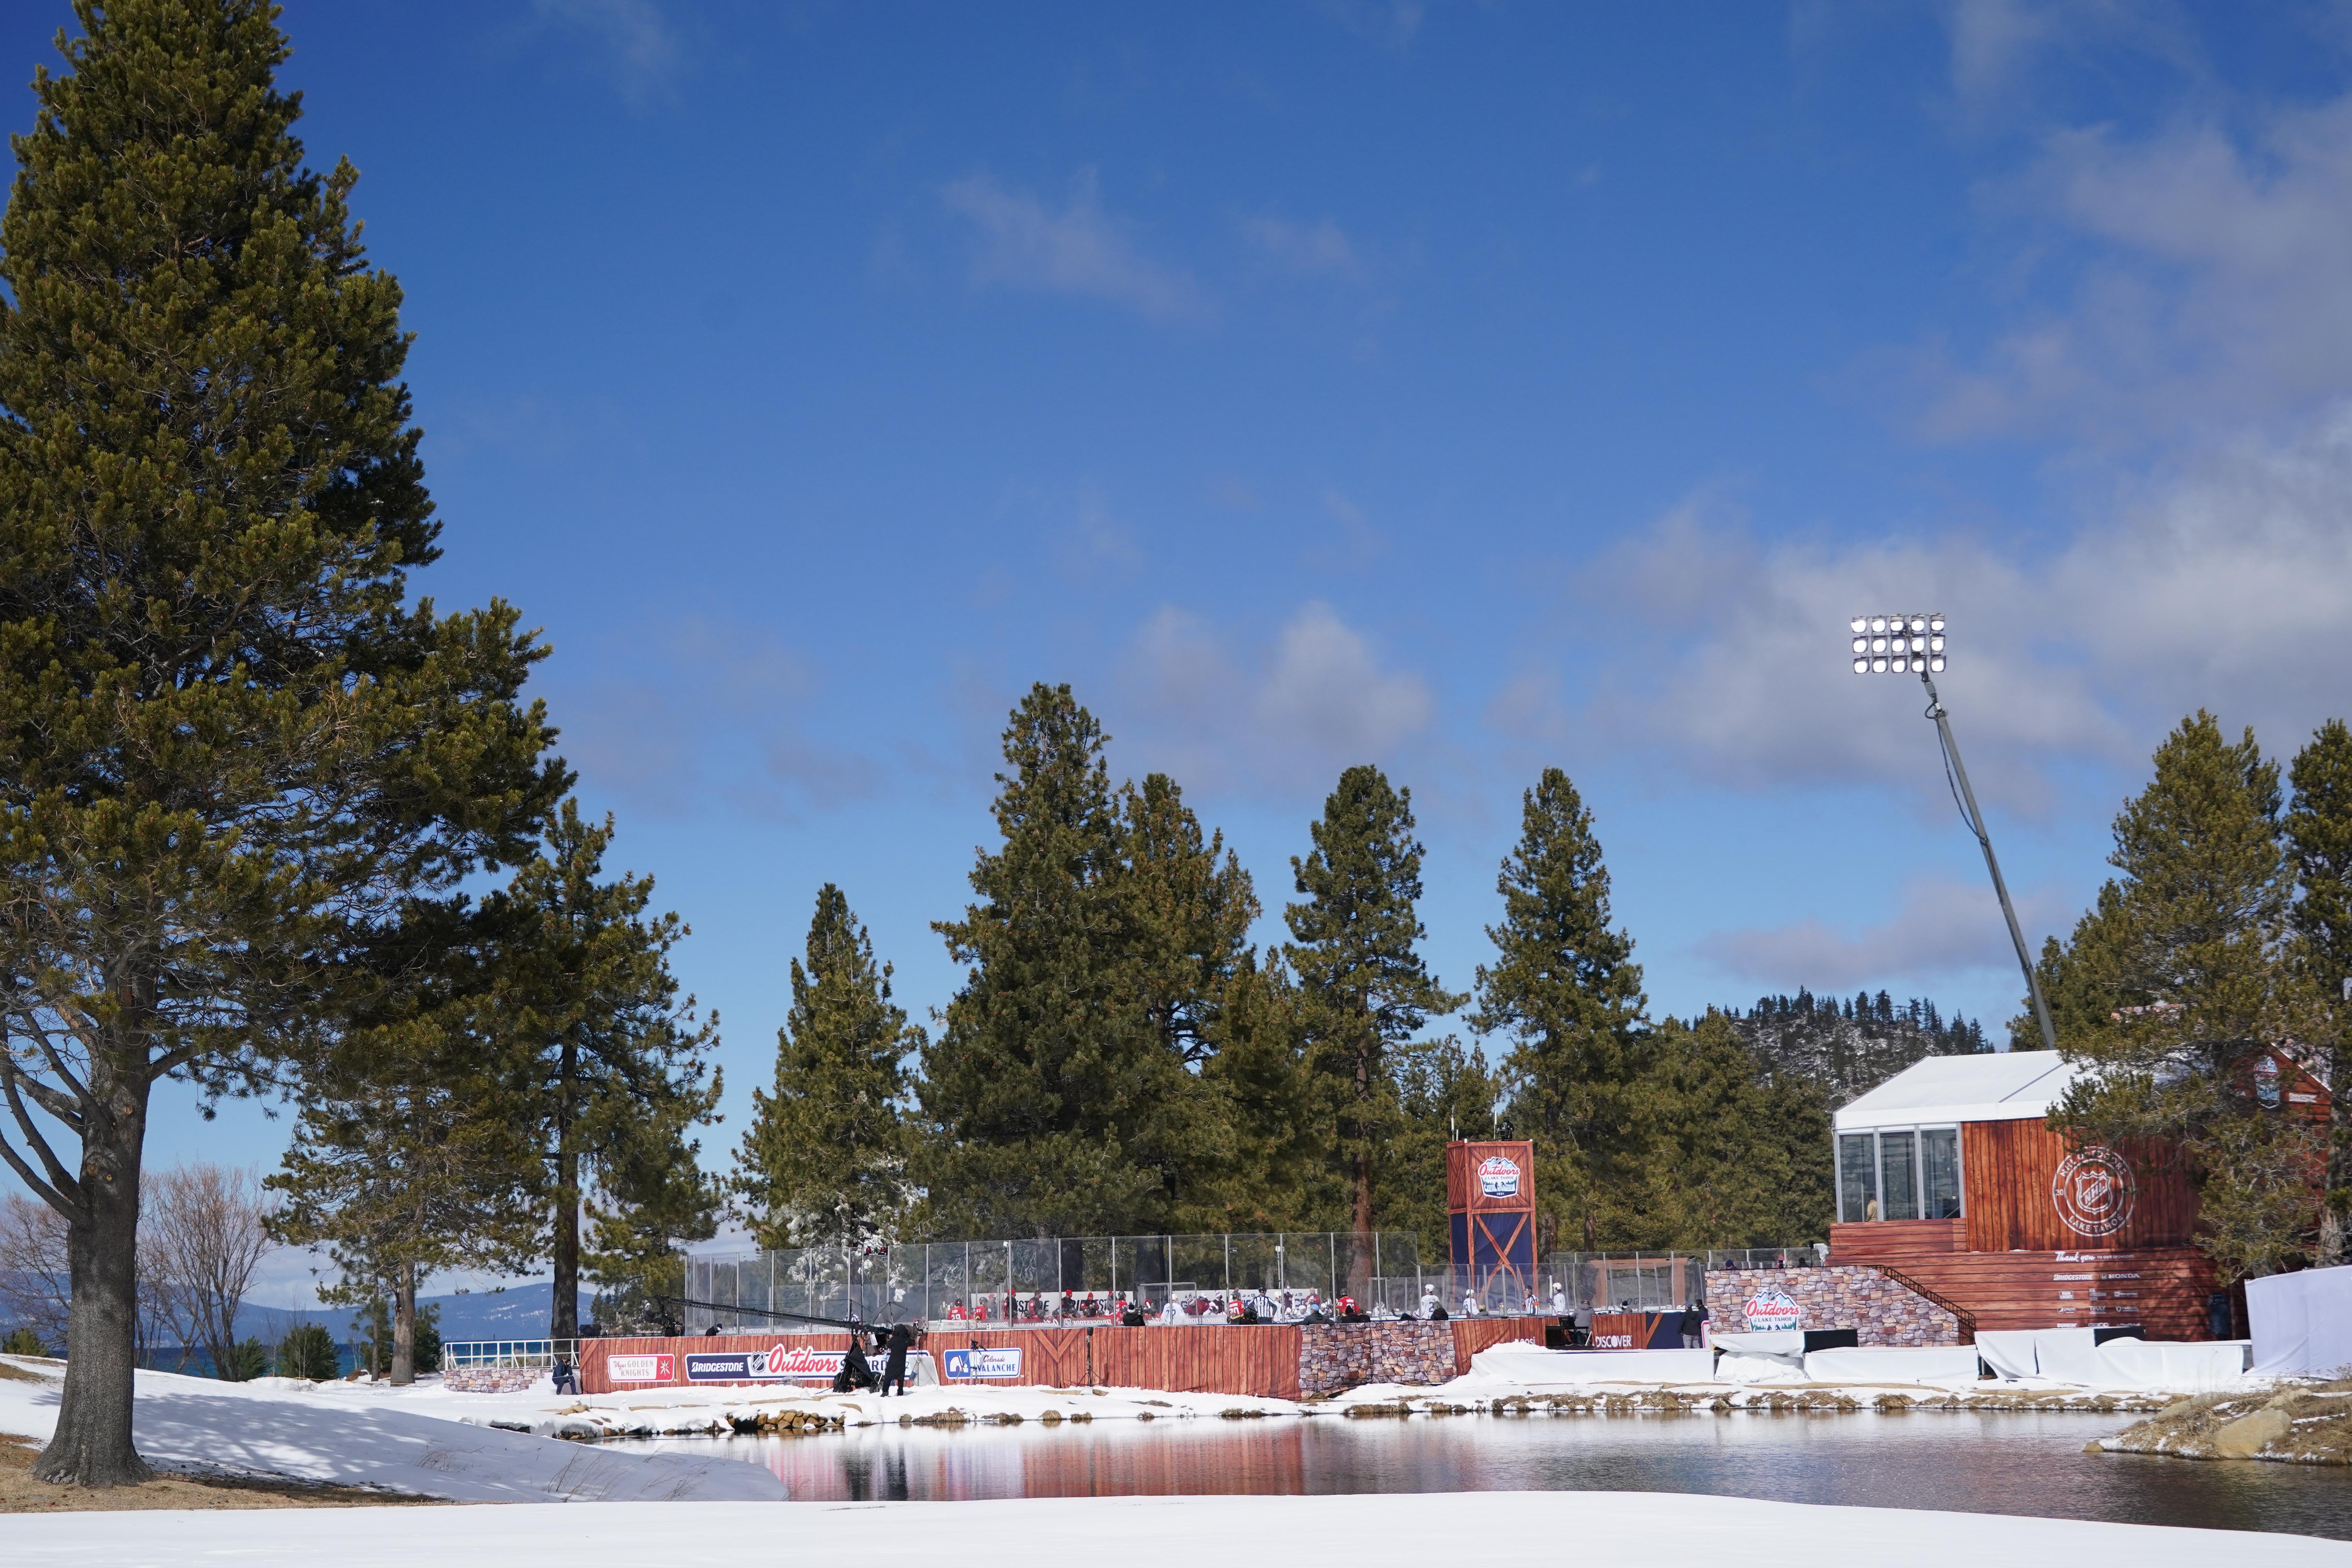 Bright sun, poor ice delay outdoor NHL game at Lake Tahoe